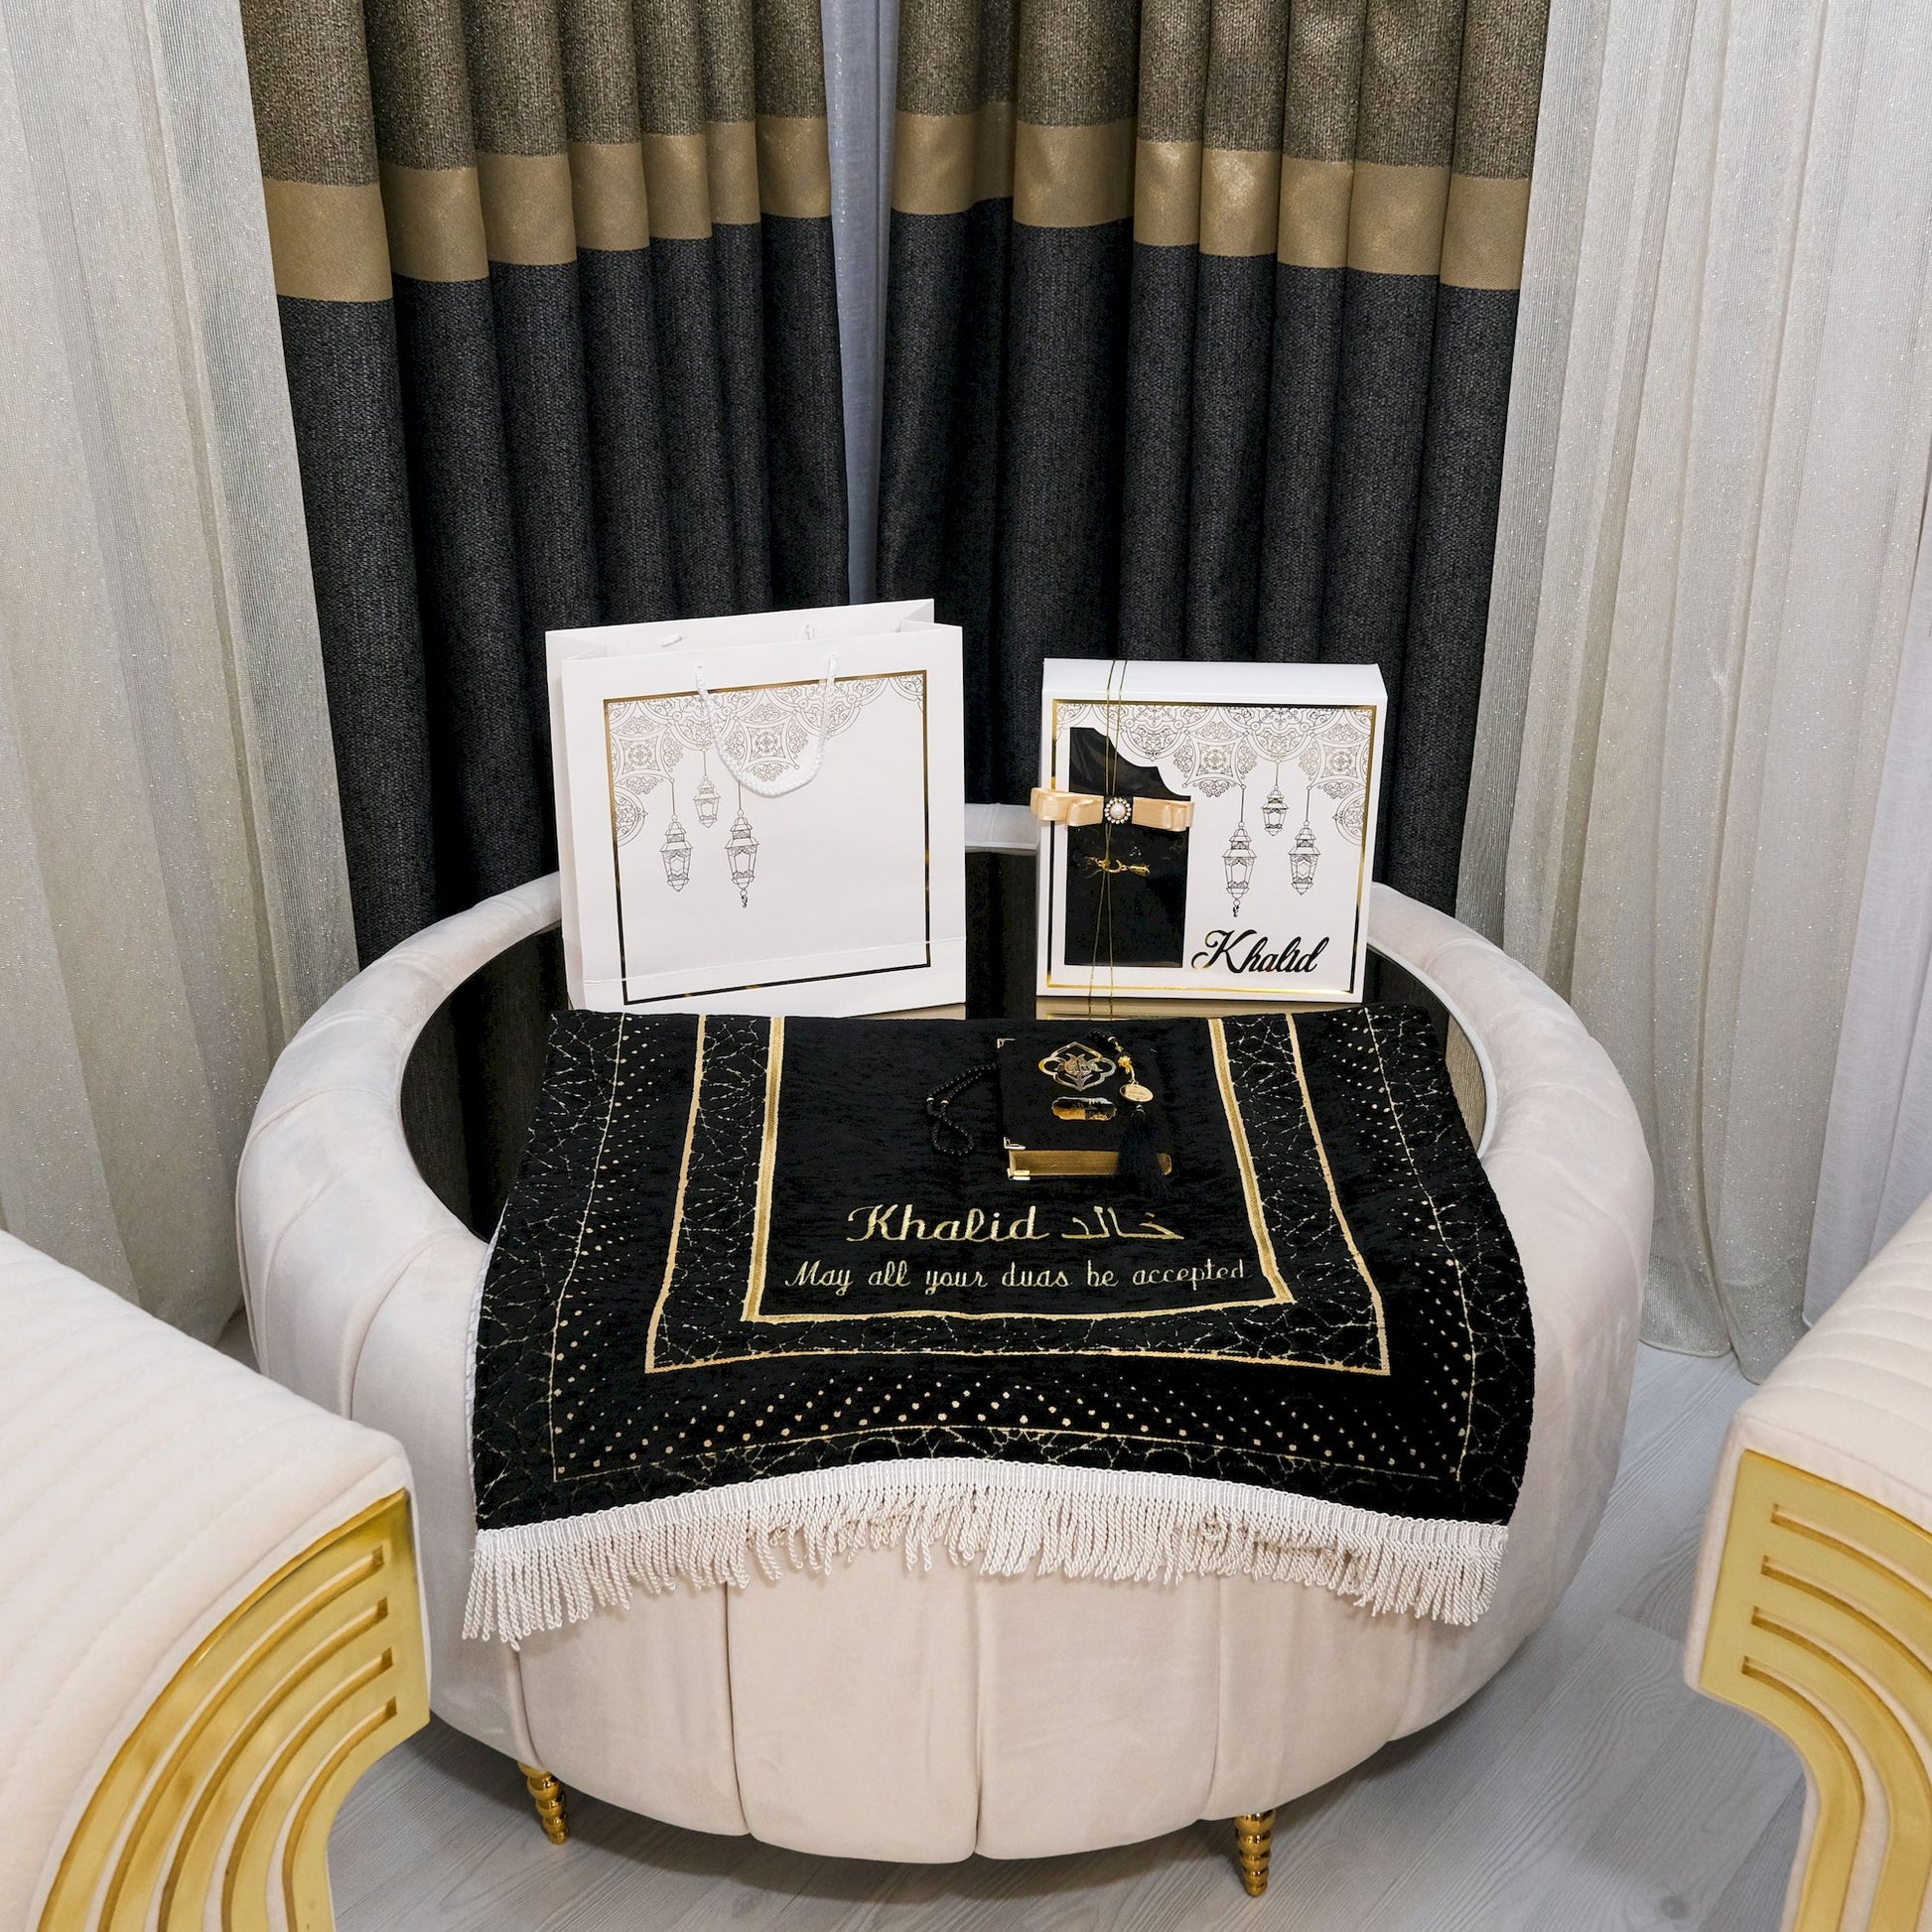 Personalized Velvet Thick Prayer Mat Quran Tasbeeh Islamic Gift Set - Islamic Elite Favors is a handmade gift shop offering a wide variety of unique and personalized gifts for all occasions. Whether you're looking for the perfect Ramadan, Eid, Hajj, wedding gift or something special for a birthday, baby shower or anniversary, we have something for everyone. High quality, made with love.